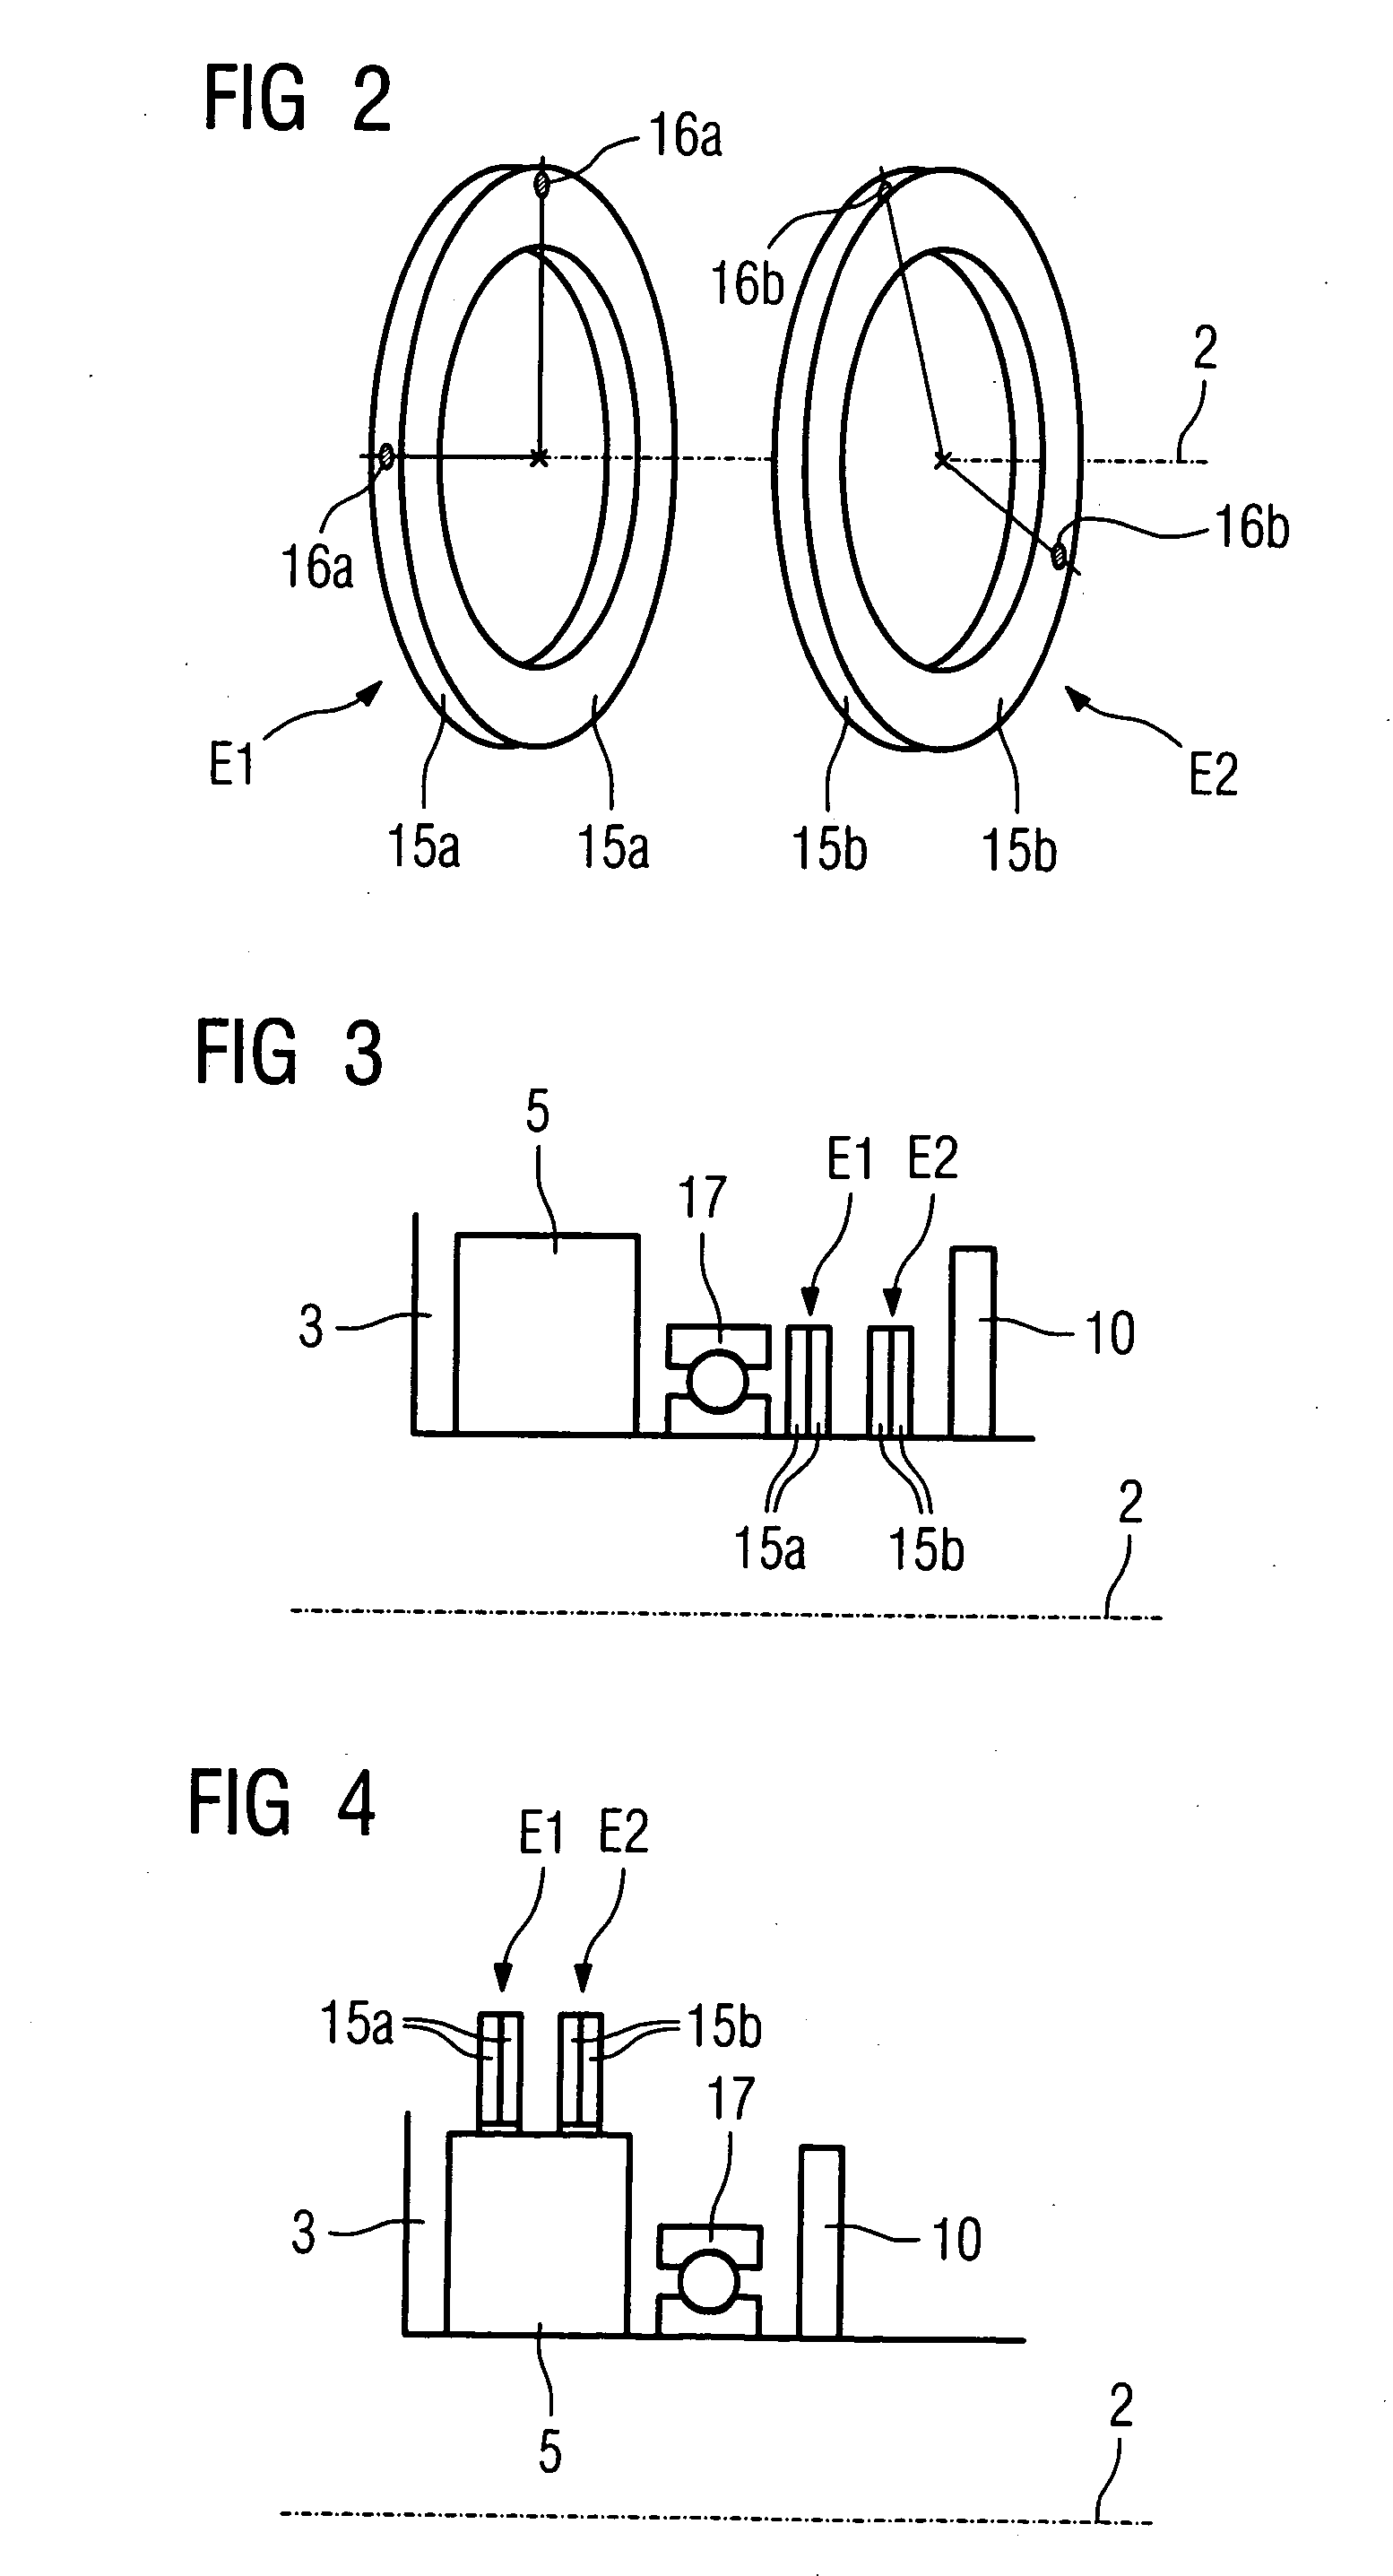 Imaging tomography apparatus with out-of-balance compensating weights in only two planes of a rotating device